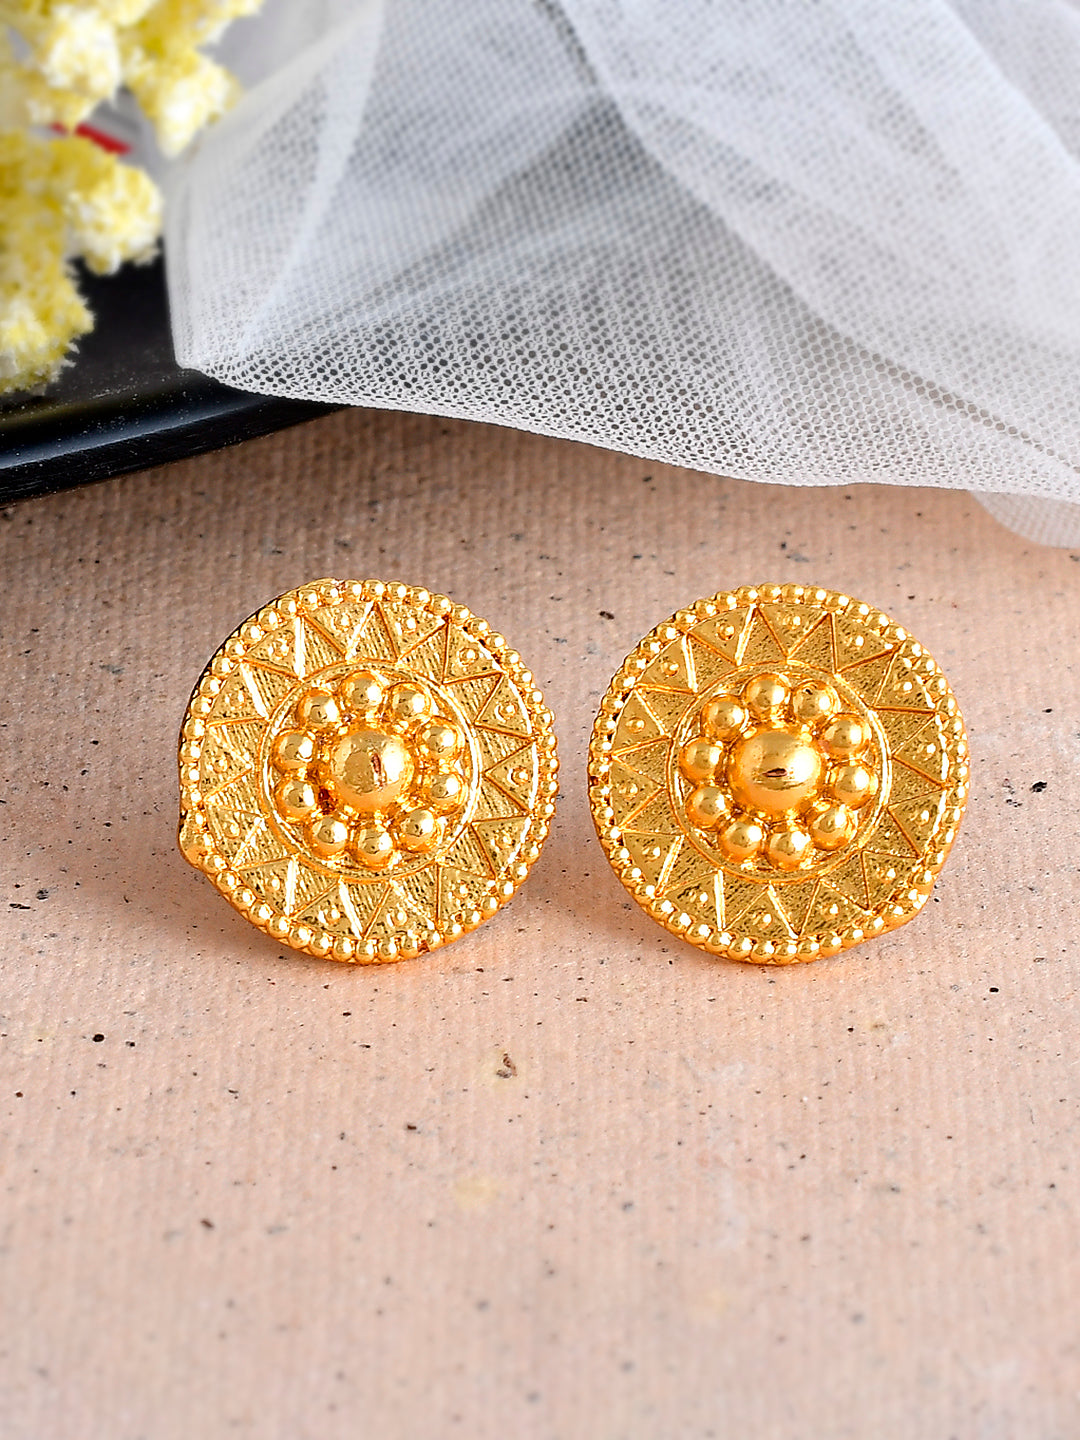 Hancrafted Gold plated Circular Stud earrings